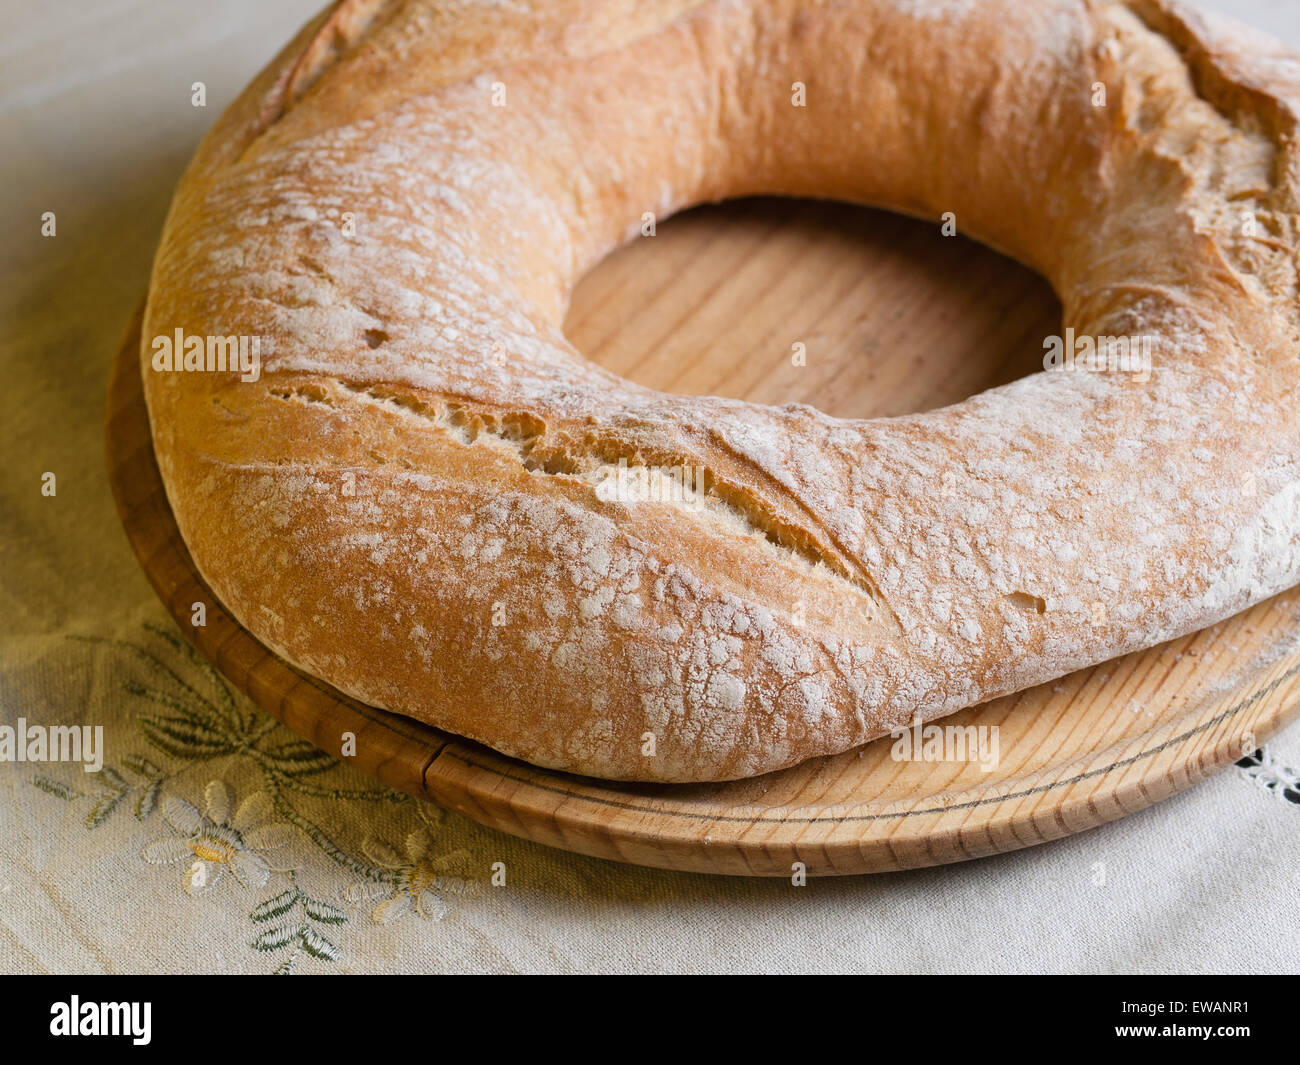 Galician bread. A typical and delicious meal of Galicia, Spain. Stock Photo